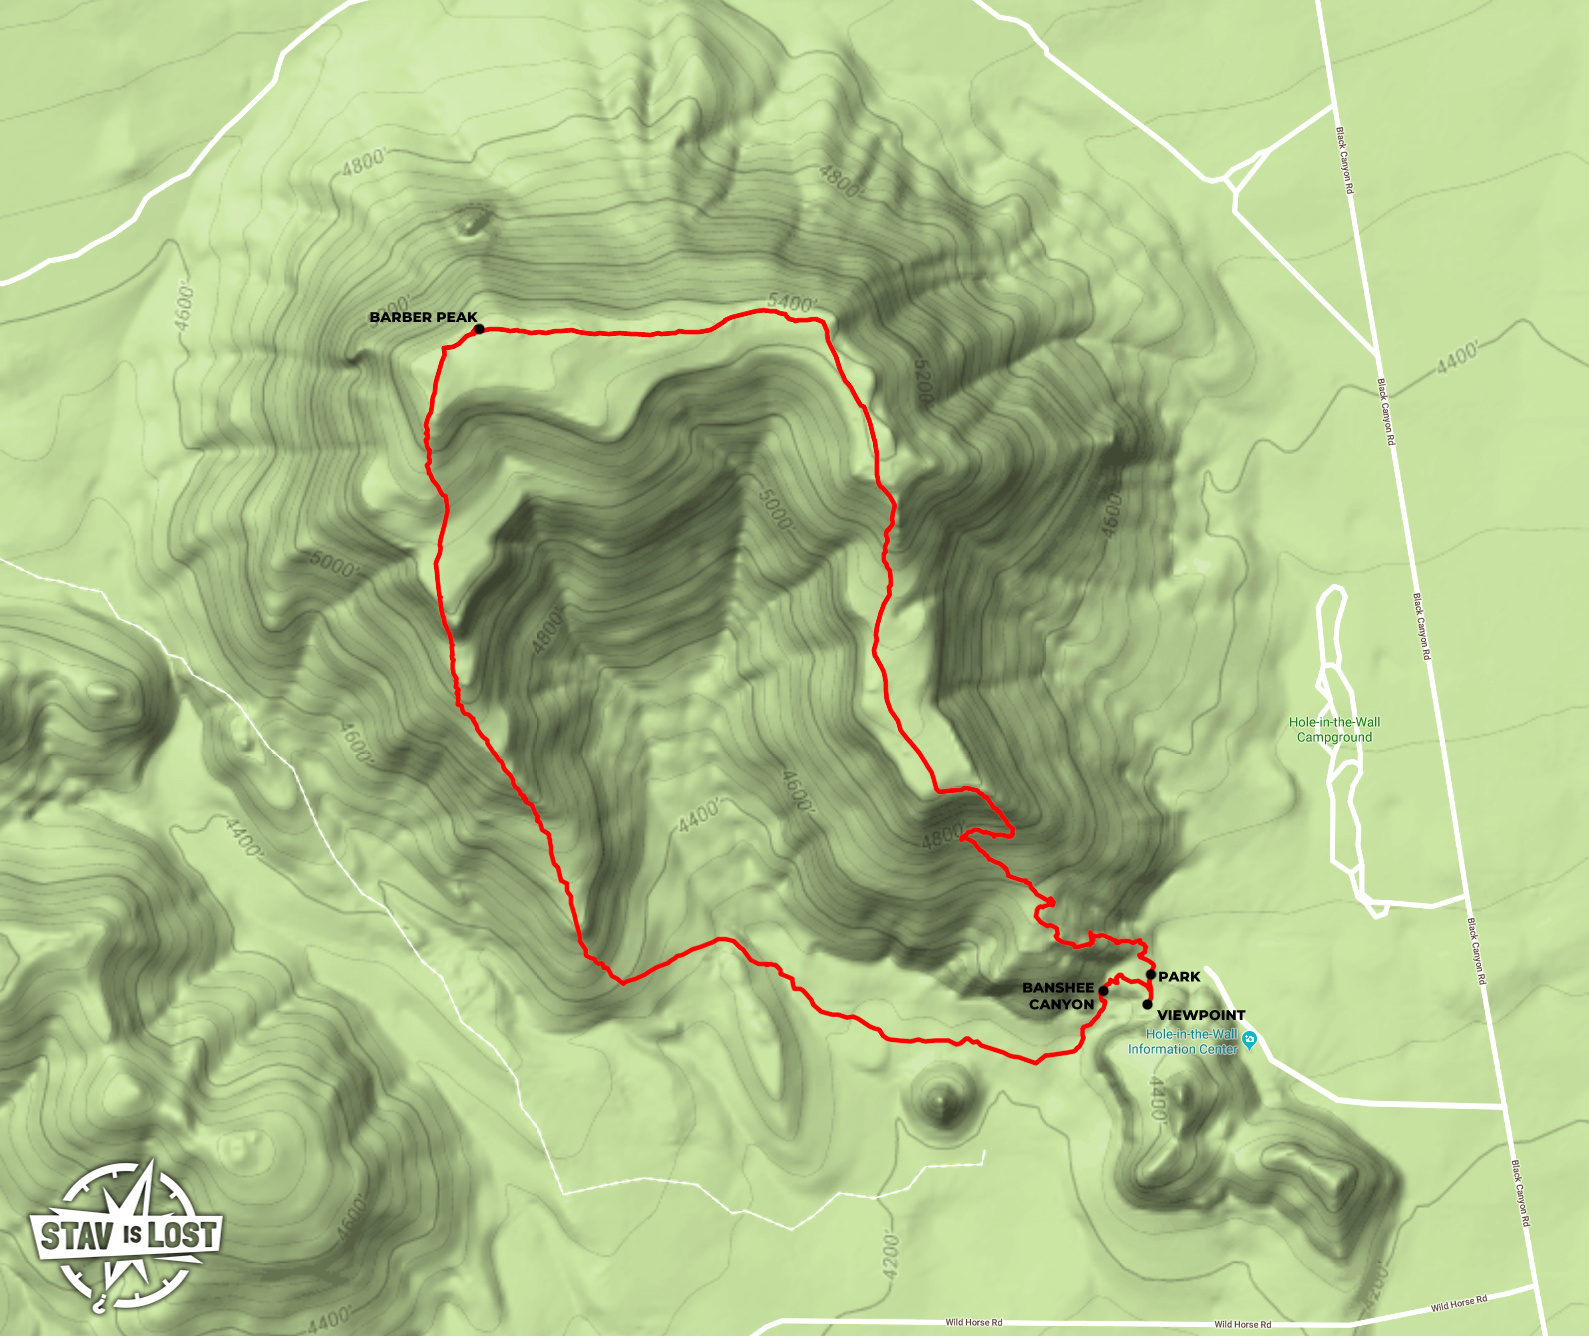 map for Banshee Canyon and Barber Peak by stav is lost